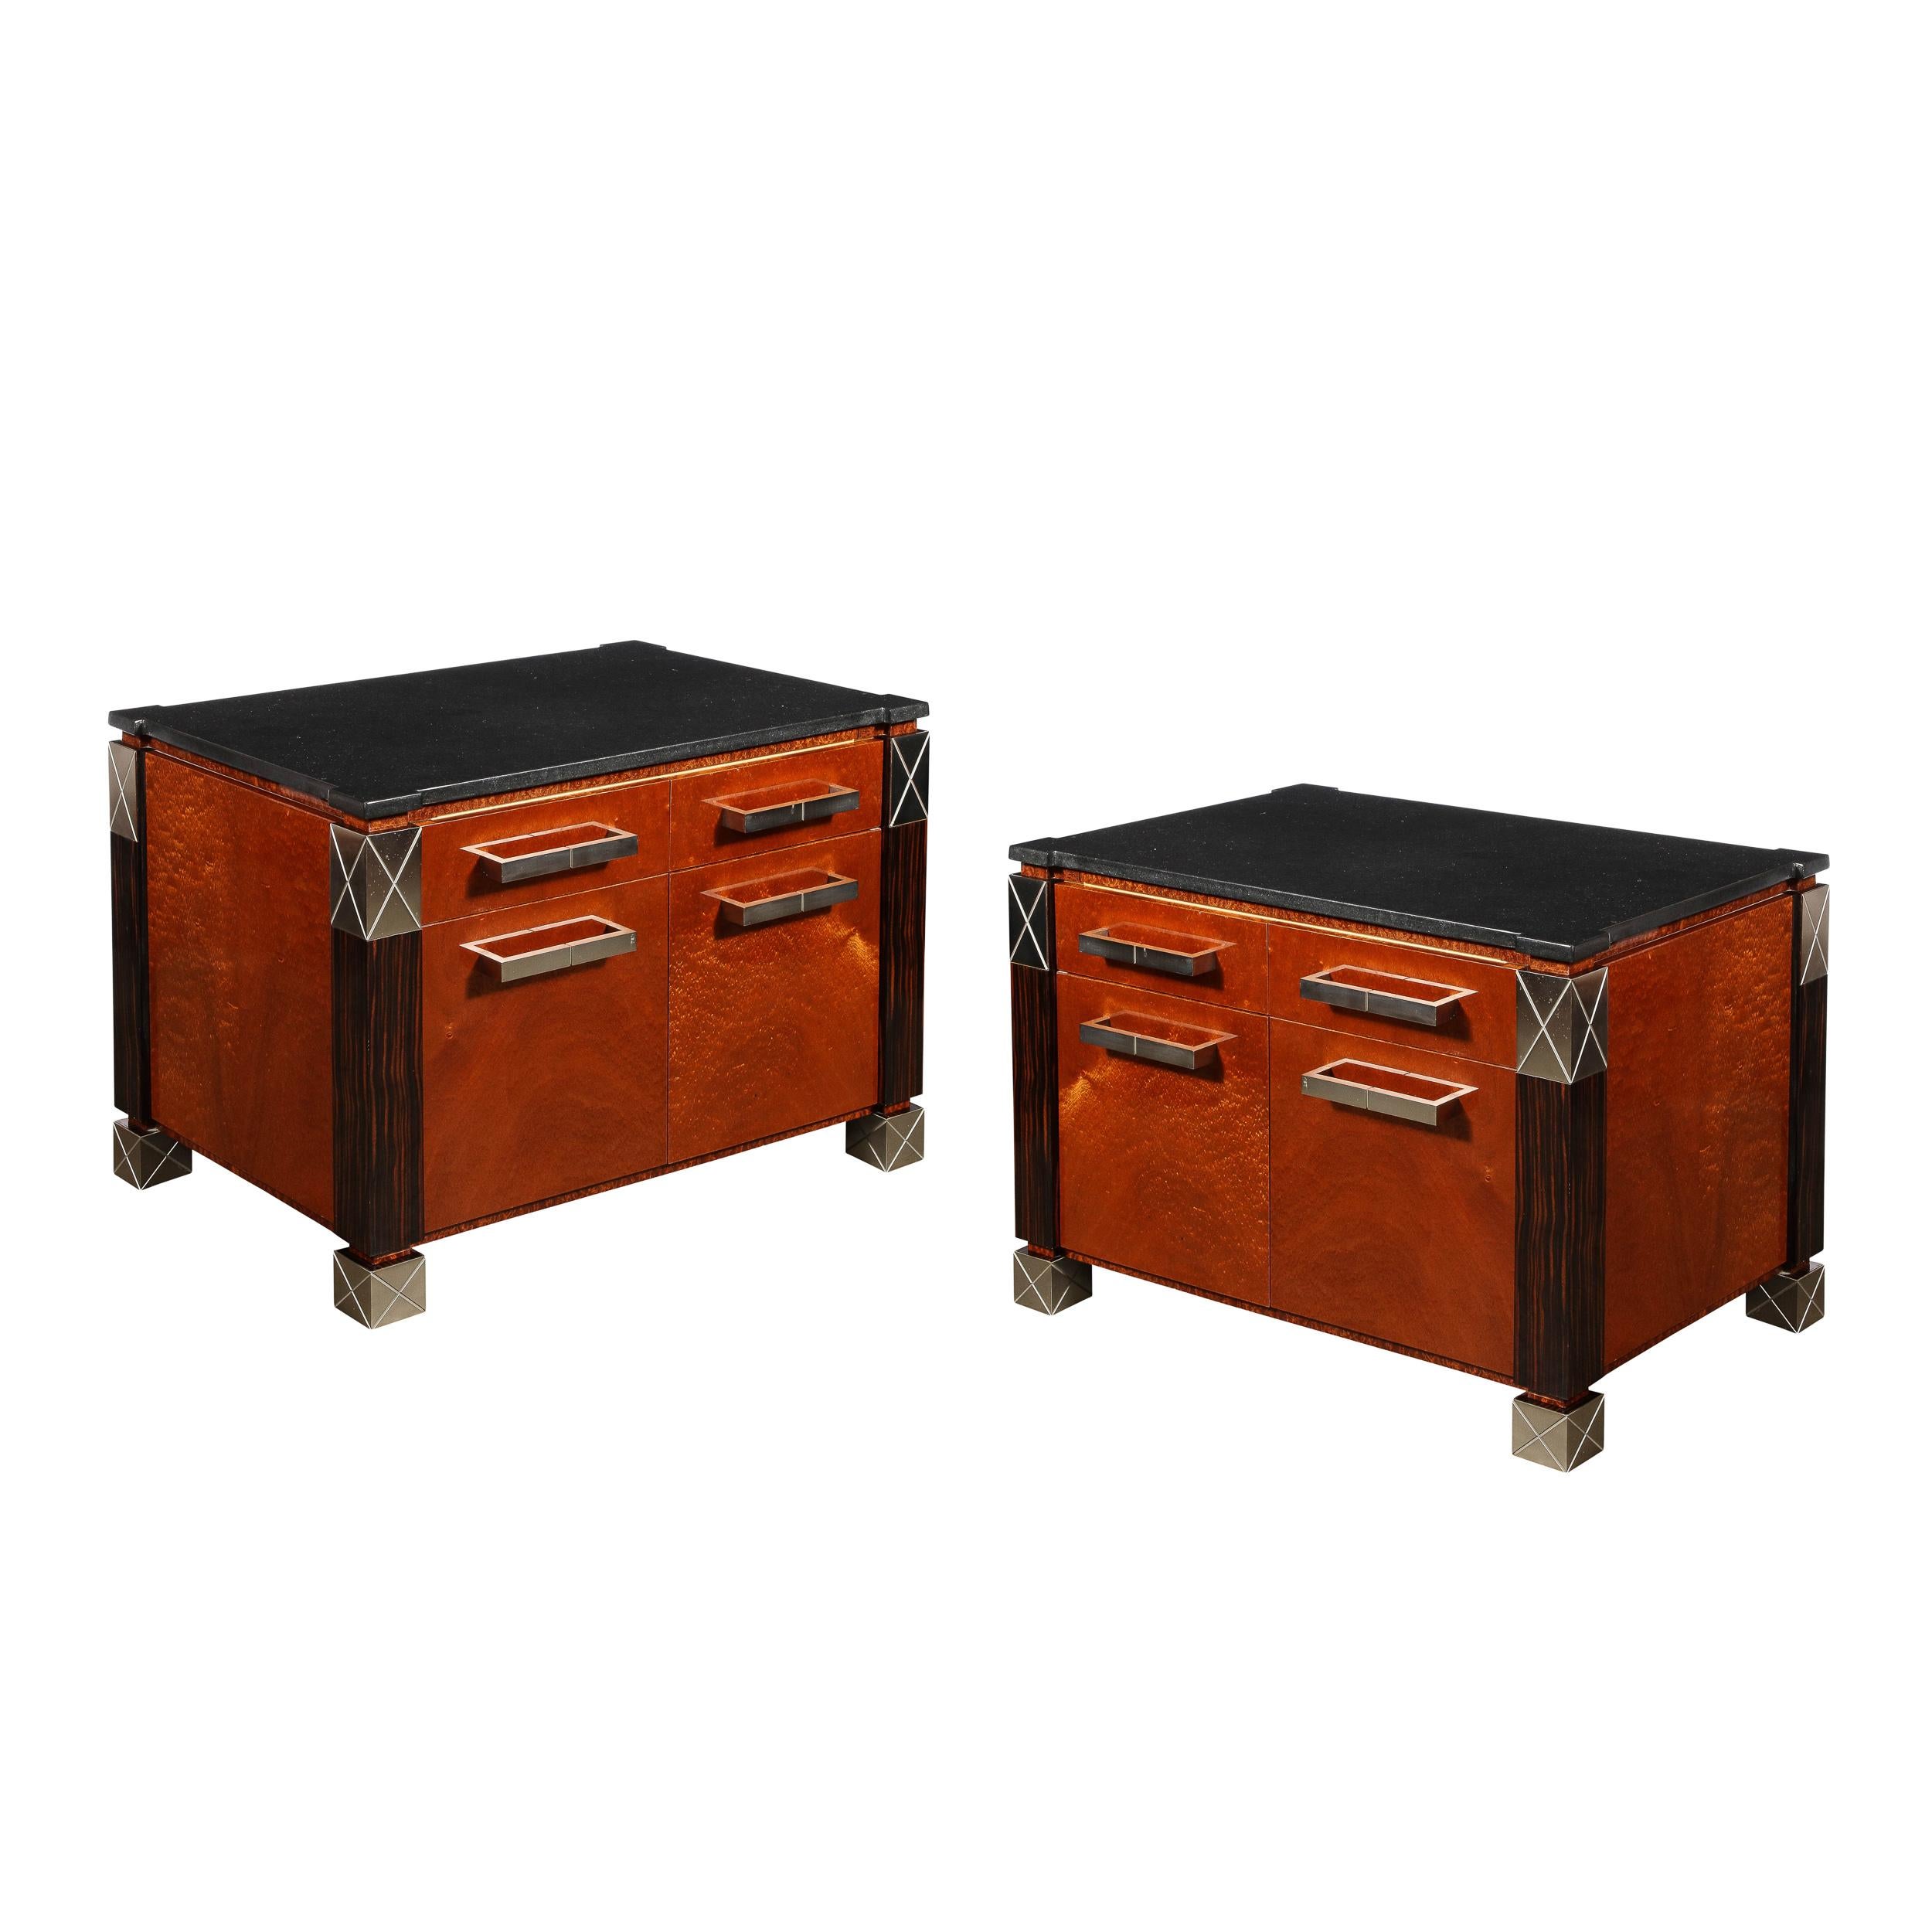 This bold and remarkably crafted Pair of Mid-Century Modernist Marble Topped End tables / Nightstands  in Satin Nickel, Macassar Ebony, & Book-Matched  burled Walnut were manufactured by the company Lorin Marsh and originates from the United States